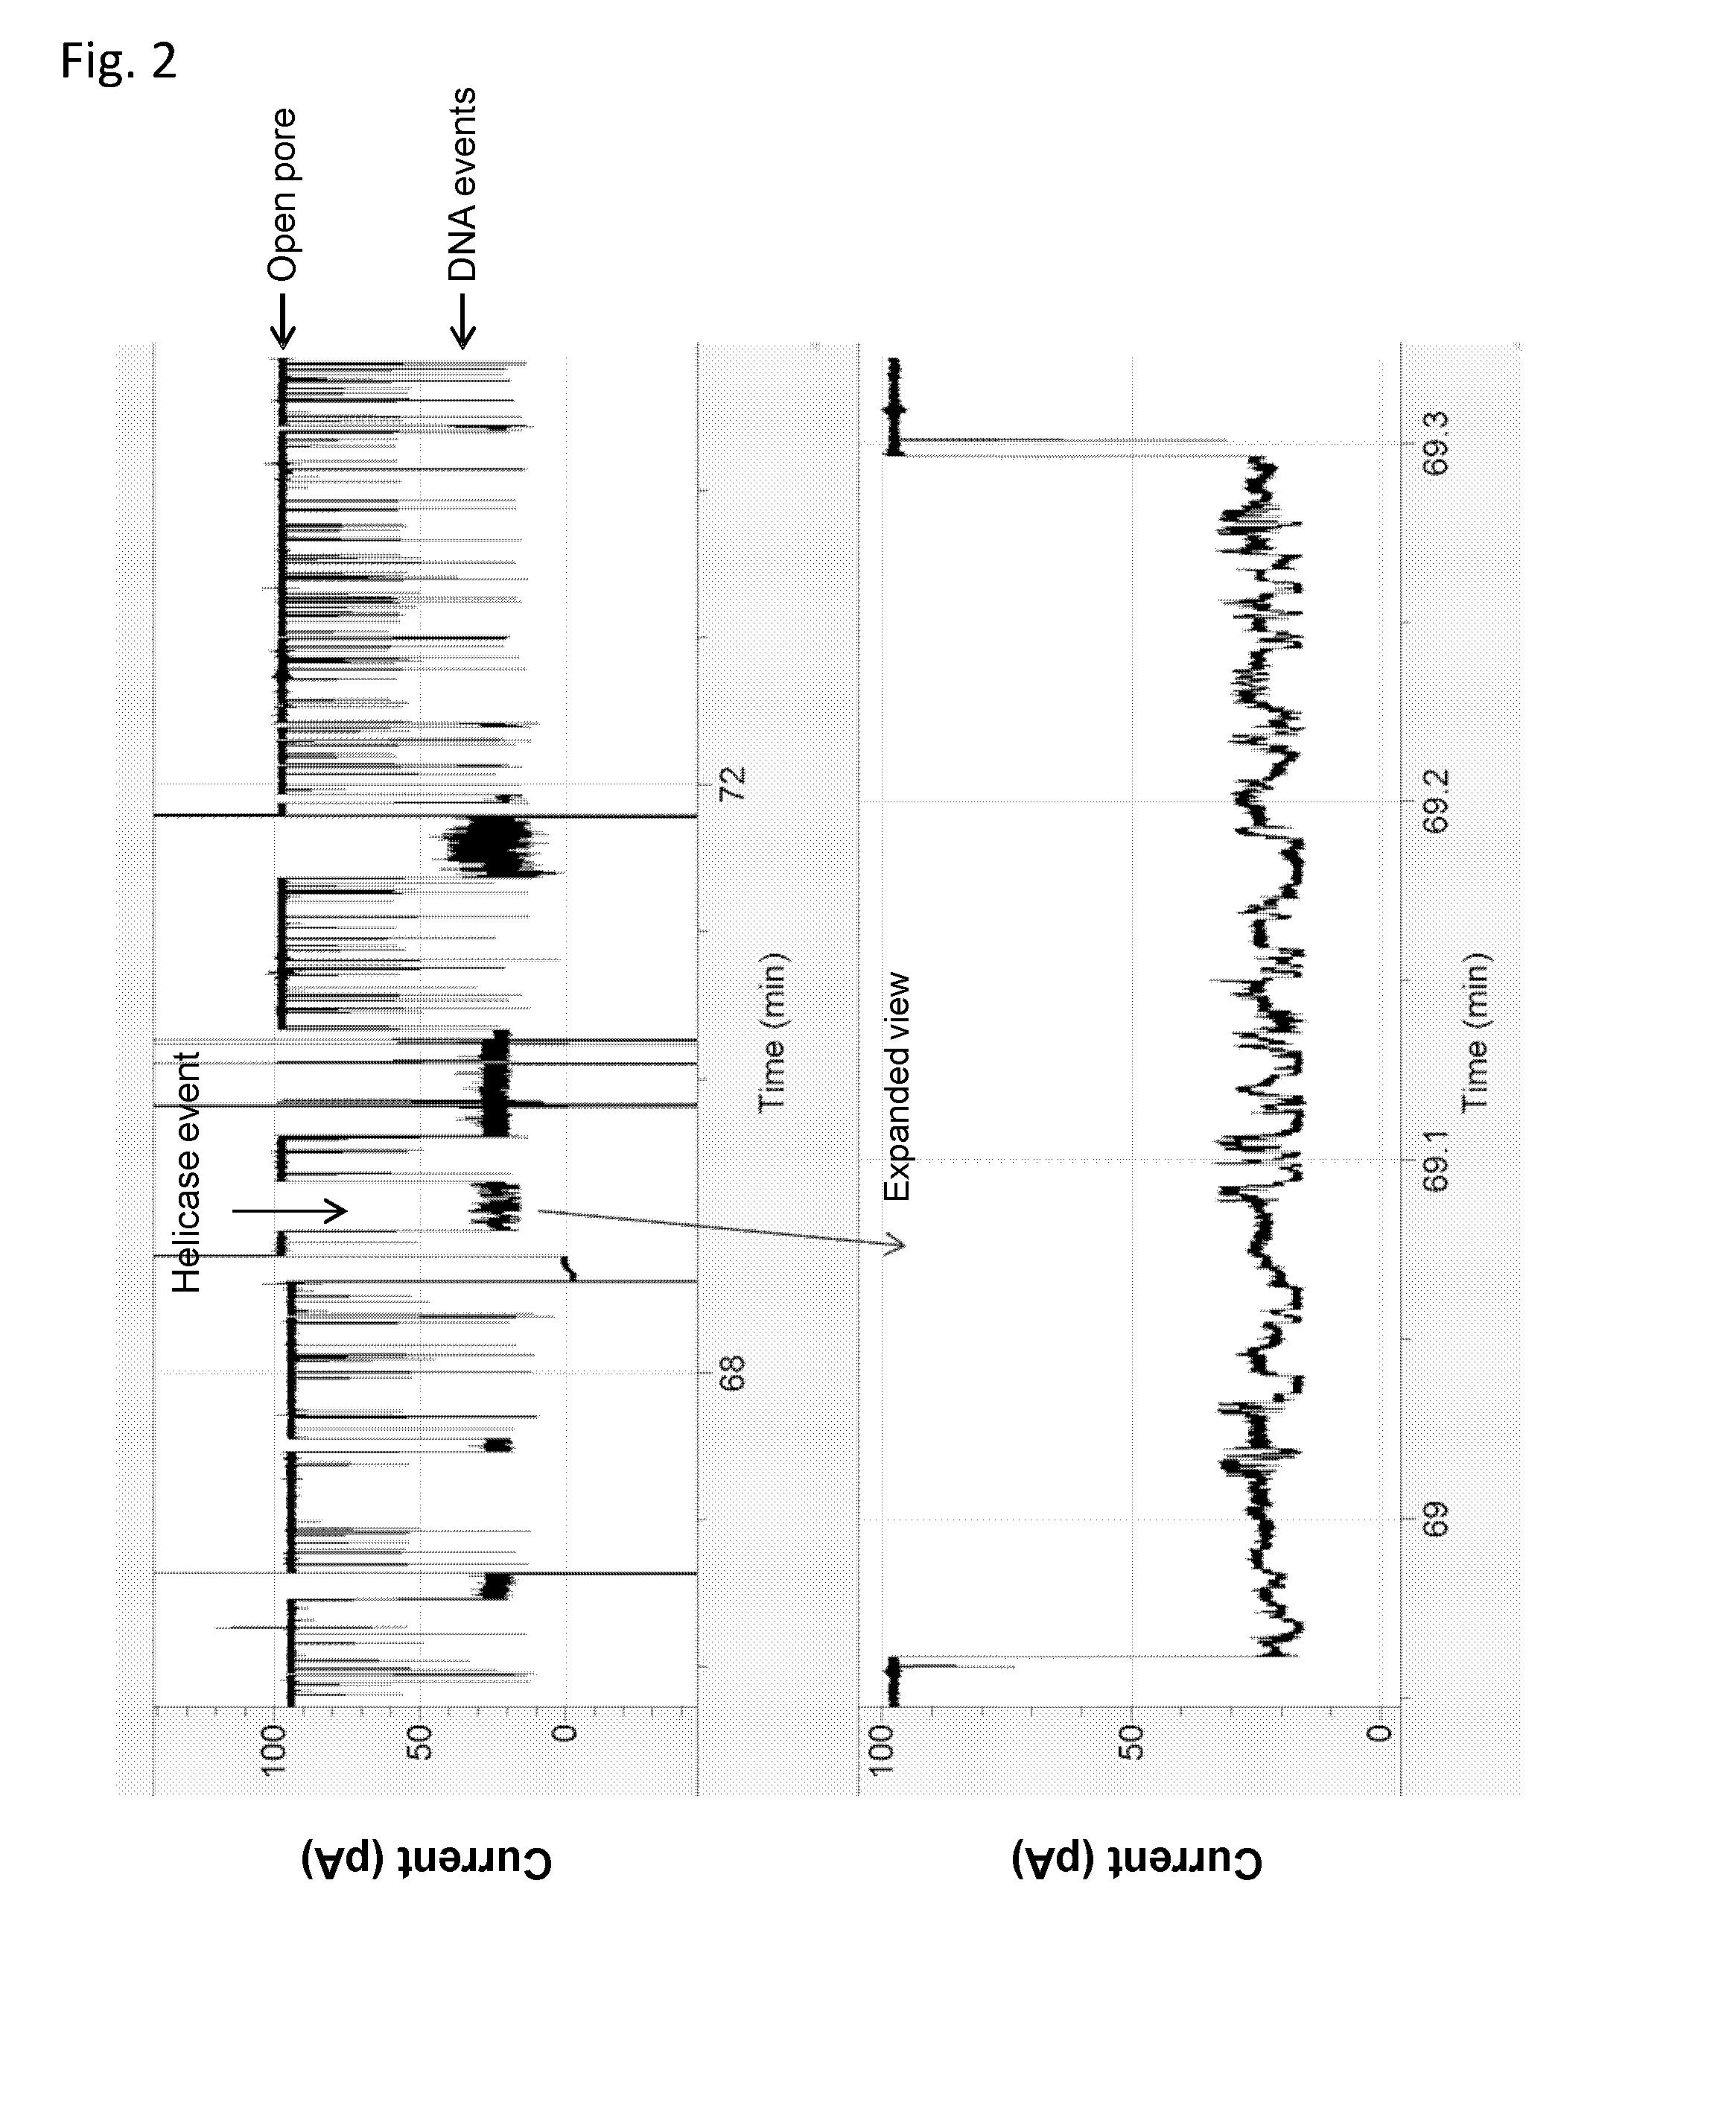 Method for characterising a polynucelotide by using a xpd helicase